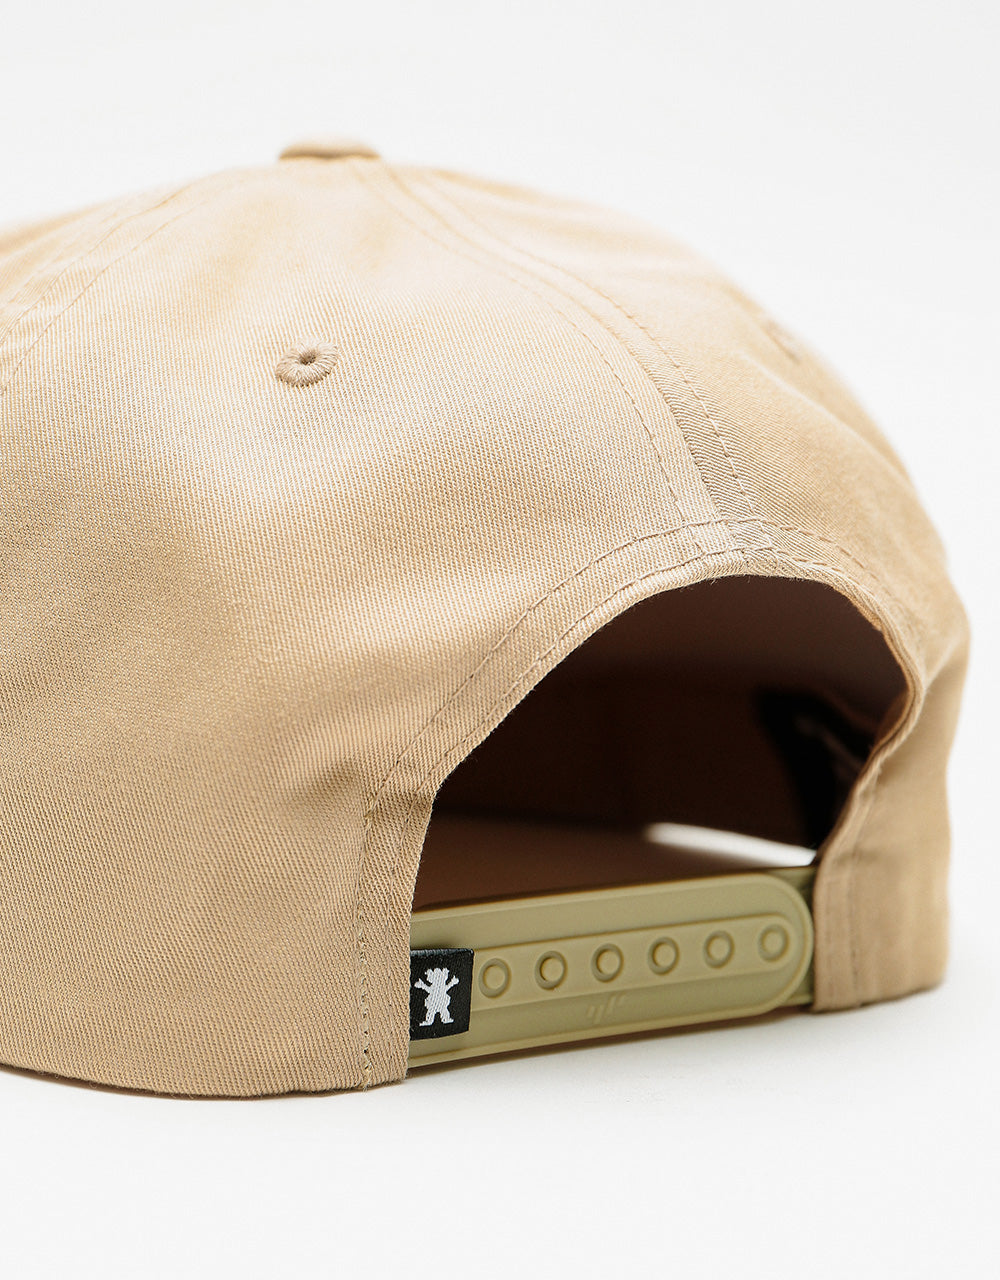 Grizzly OG Bear Unstructured Cap -  Khaki